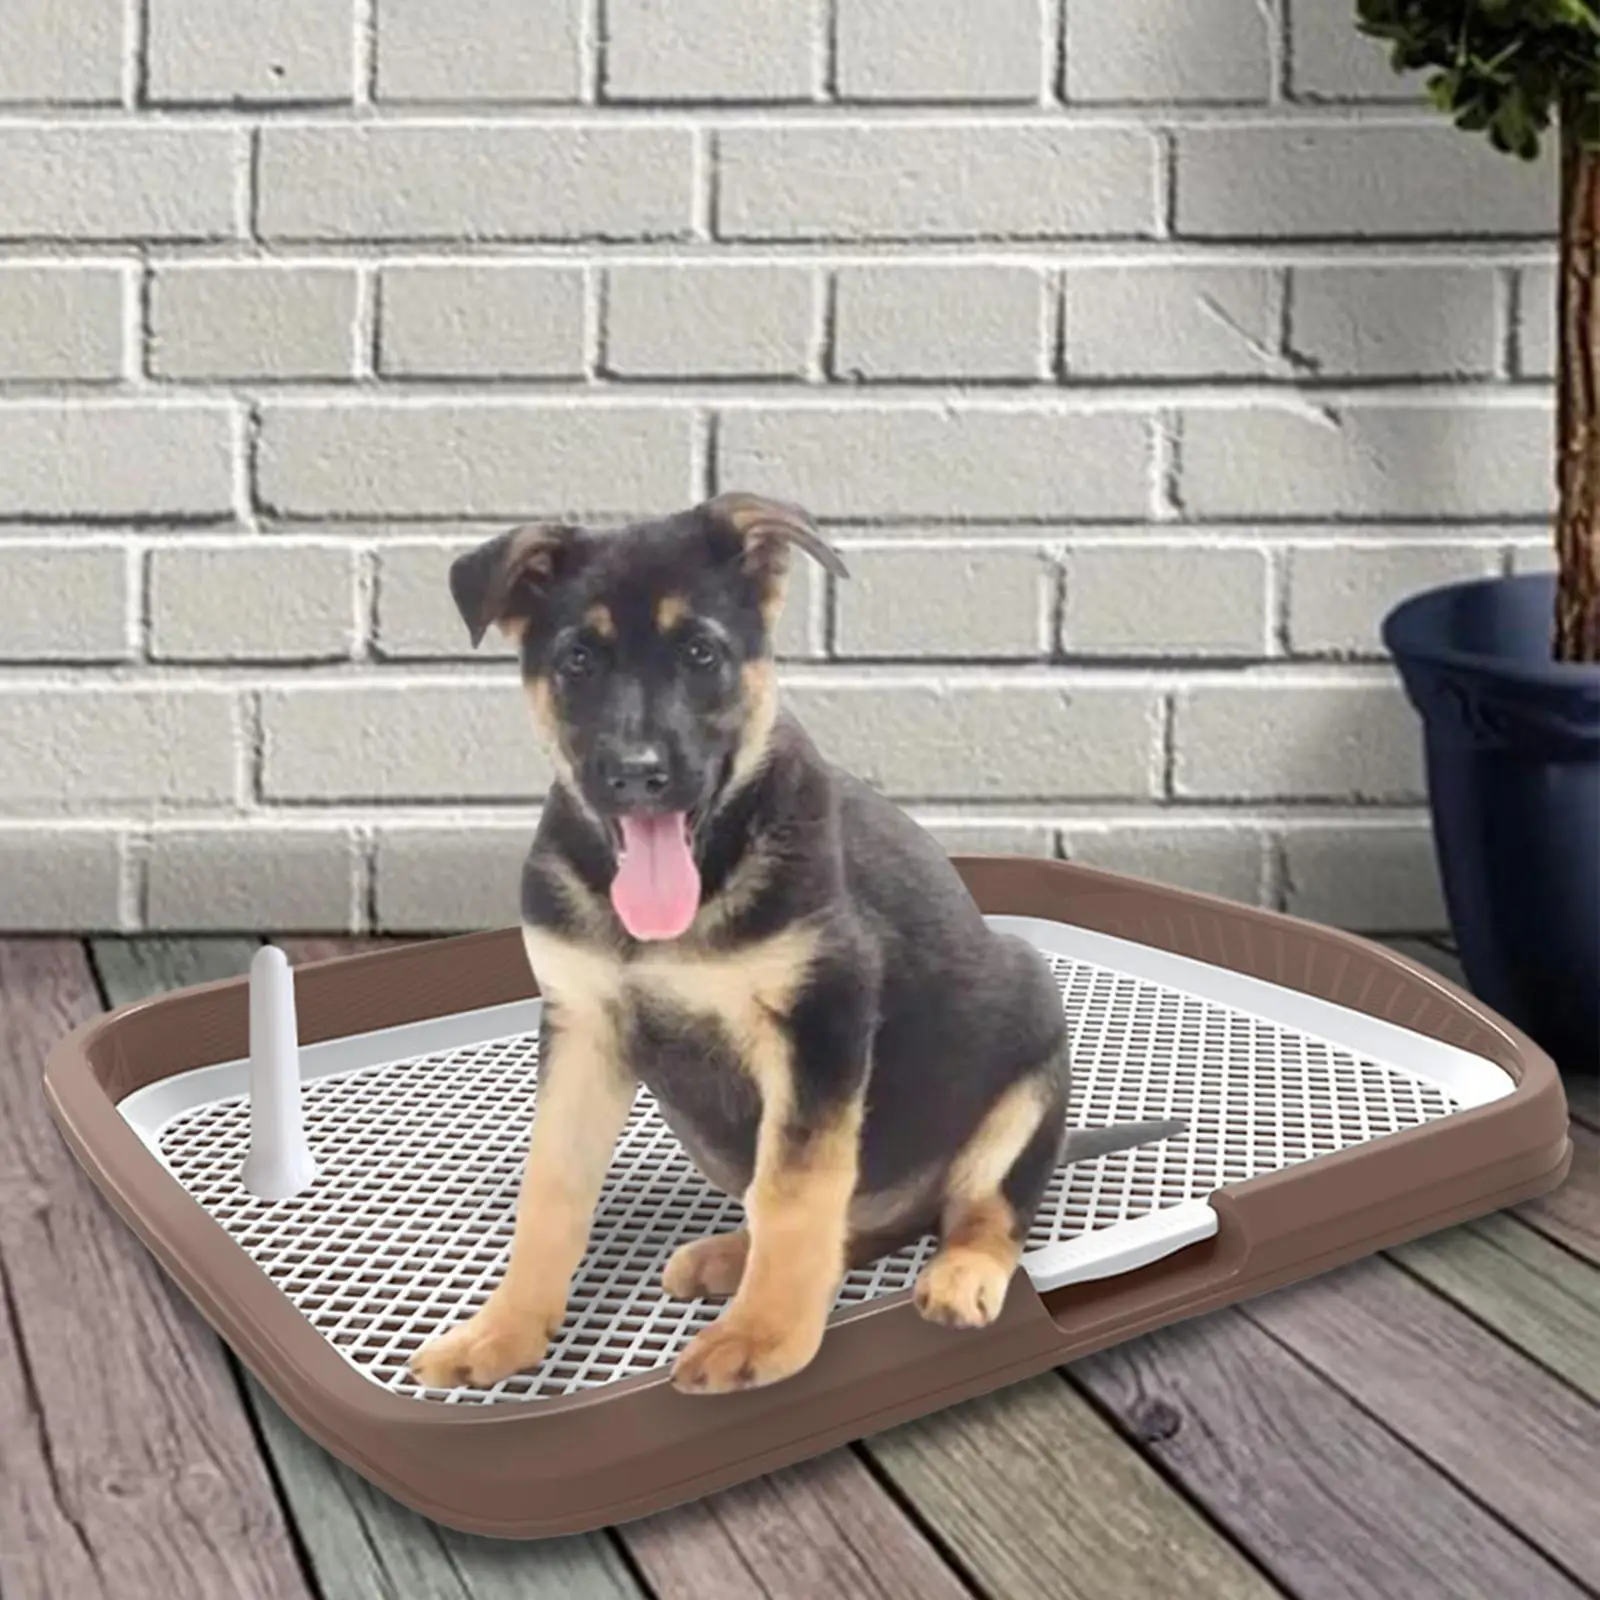 Mesh Training Toilet Pee Pad Holder Puppy Toilet Washable Potty Tray Keep Paws Clean Toilet Pet Products Indoor Outdoor